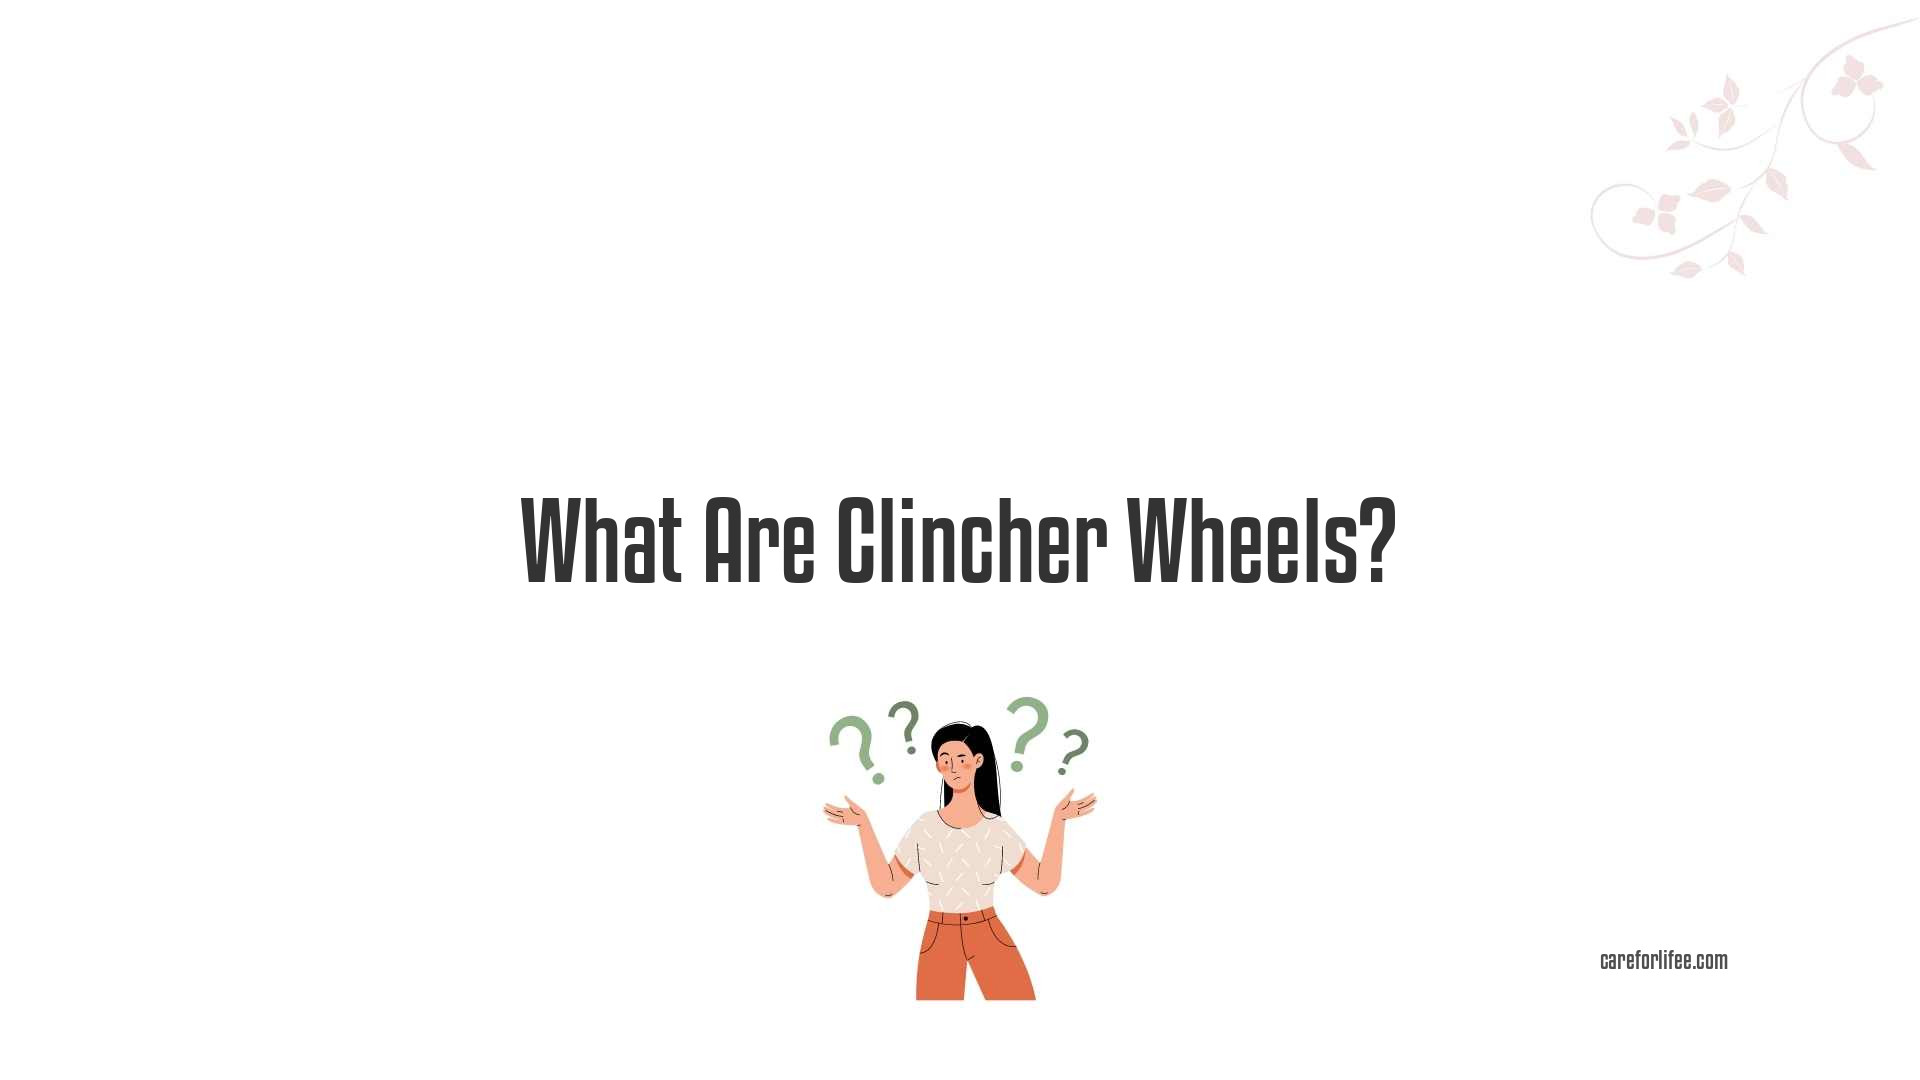 What Are Clincher Wheels?